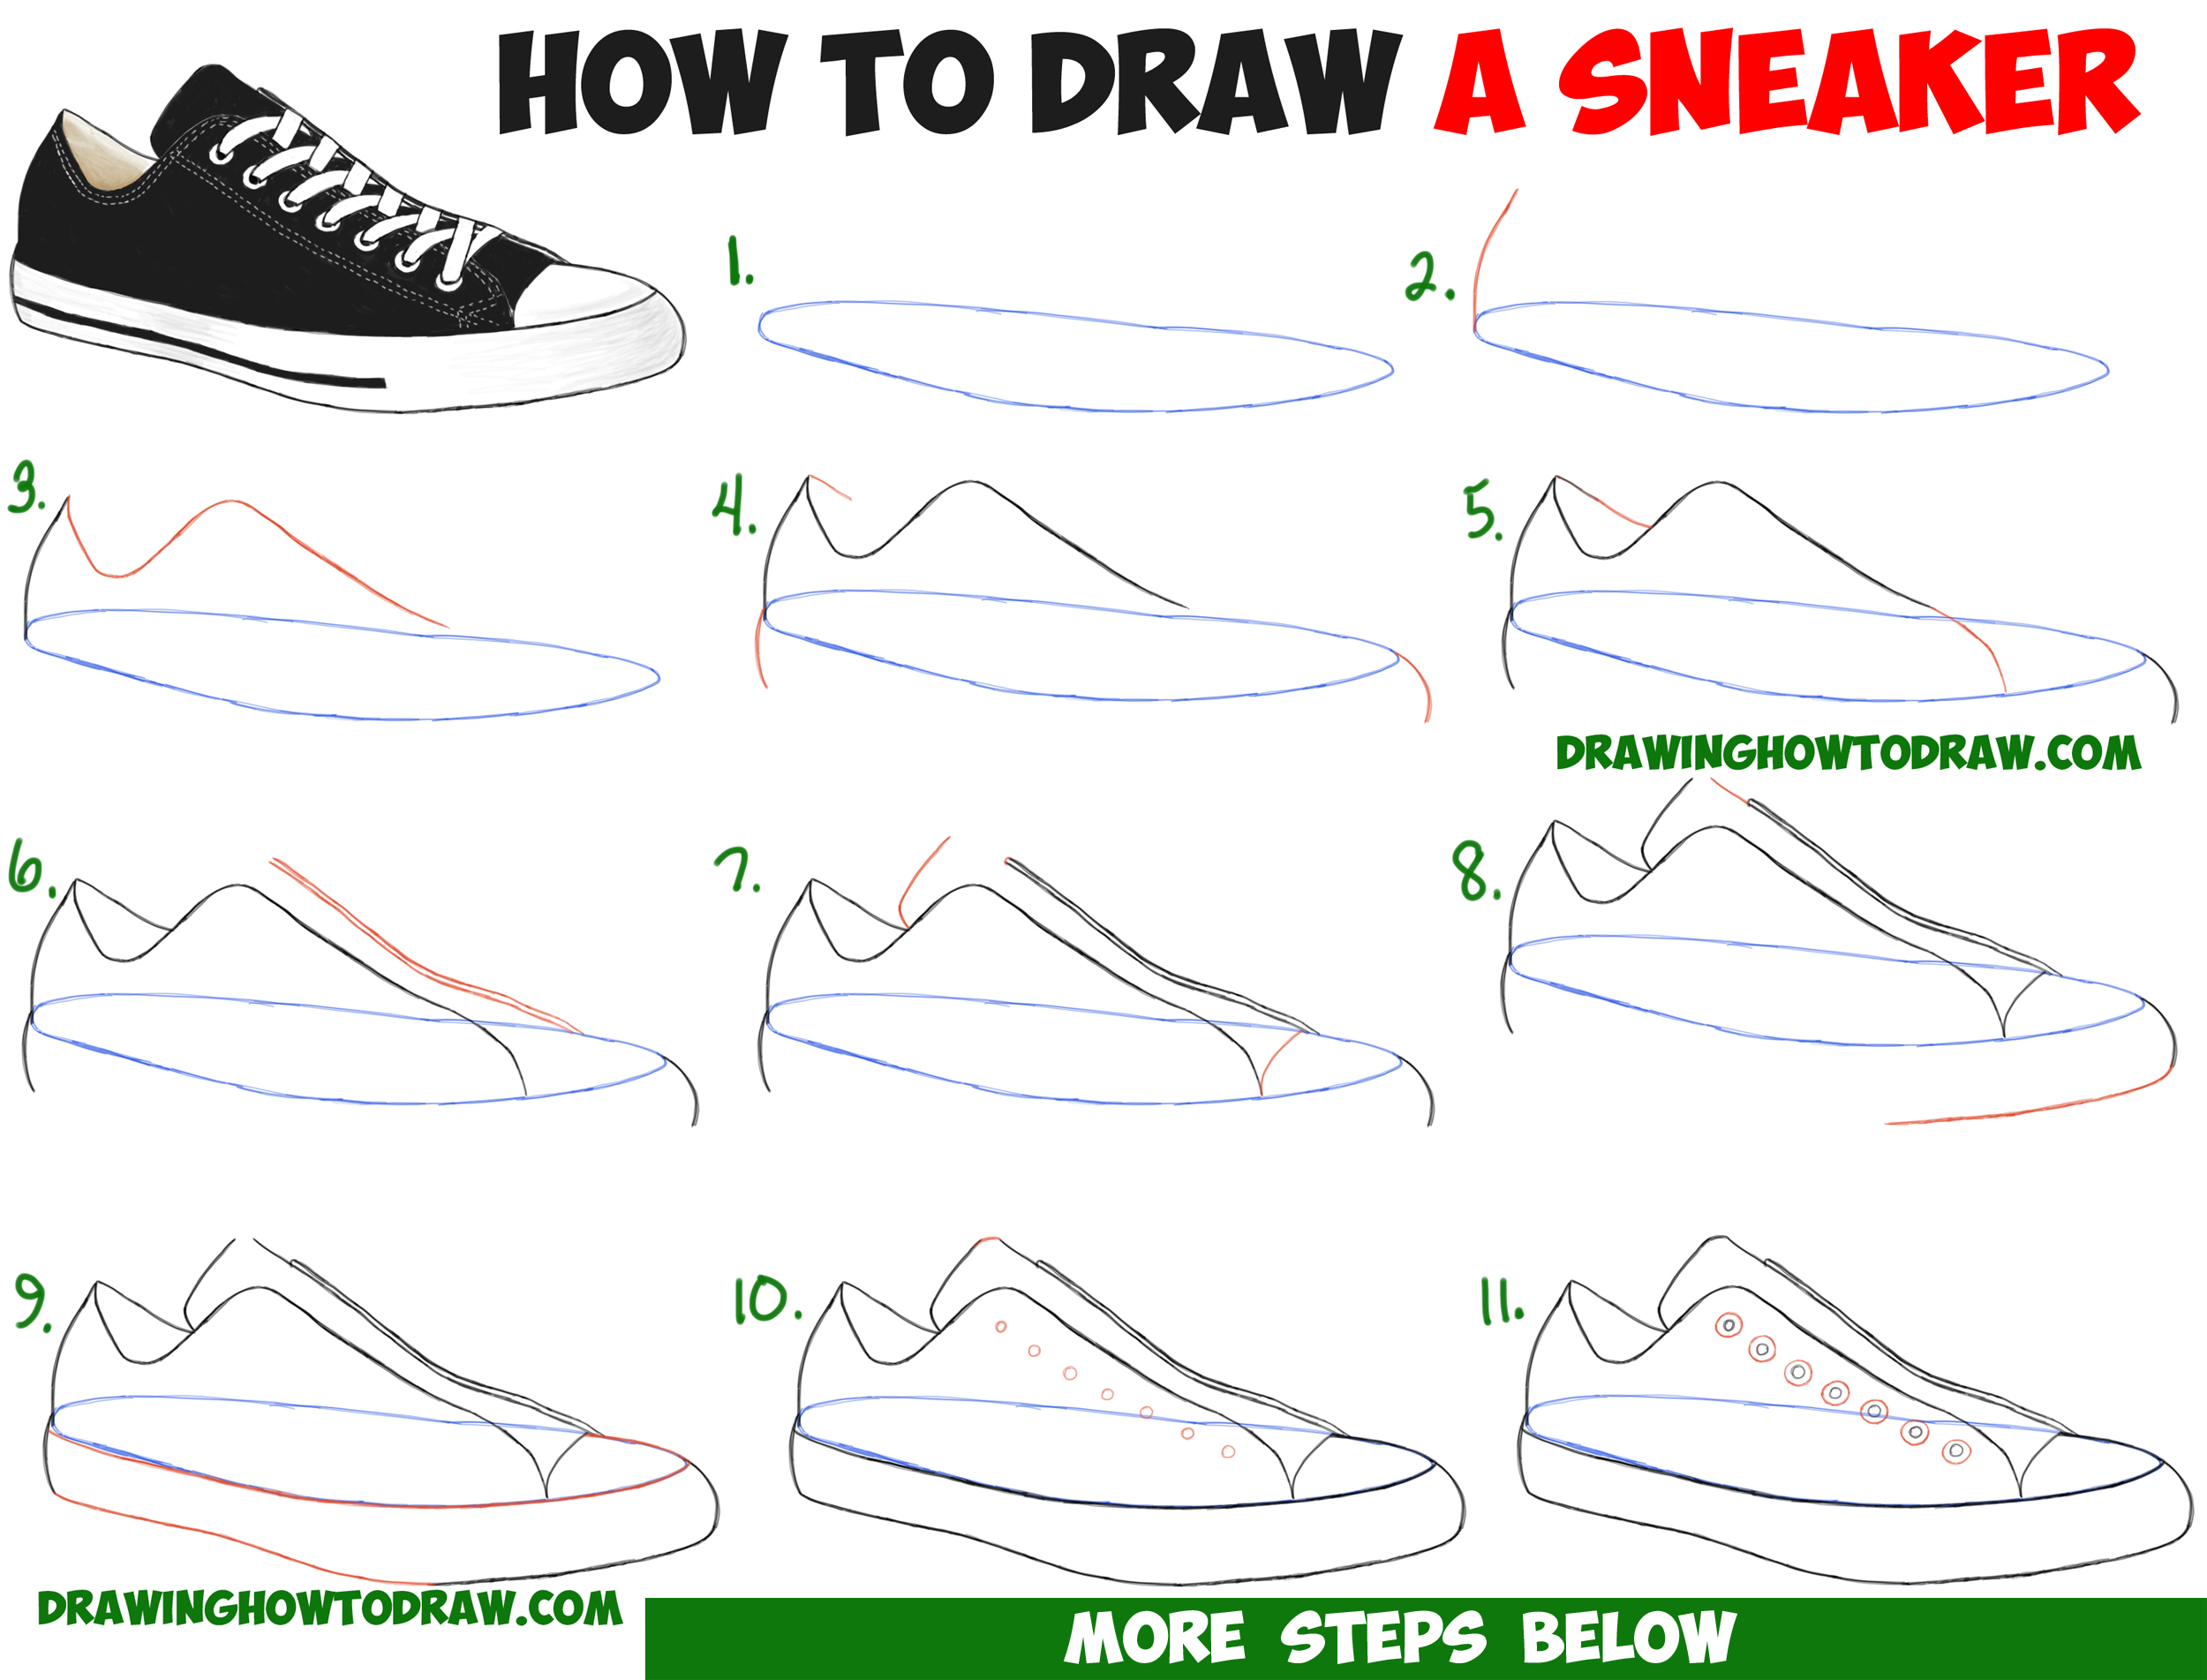 Amazing How Do You Draw A Shoe of all time Don t miss out 